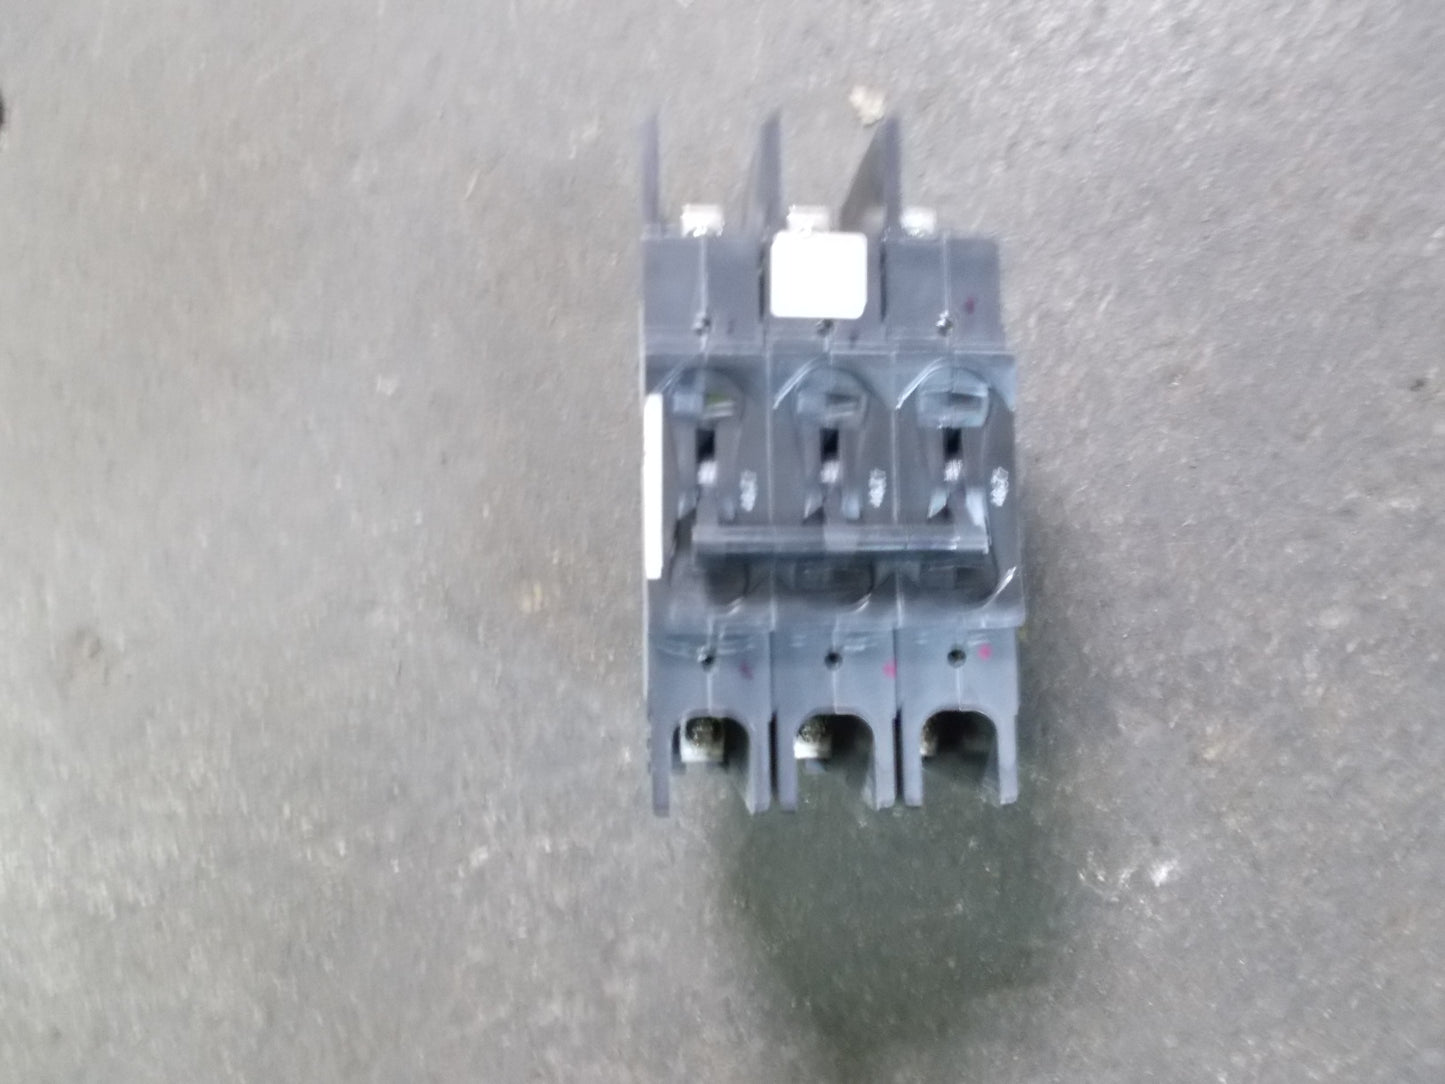 3 POLE 46.7 AMP "209 MULTI-POLE" SERIES HYDRAULIC MAGNETIC CIRCUIT BREAKER PROTECTOR 240/50-60/1 OR 3